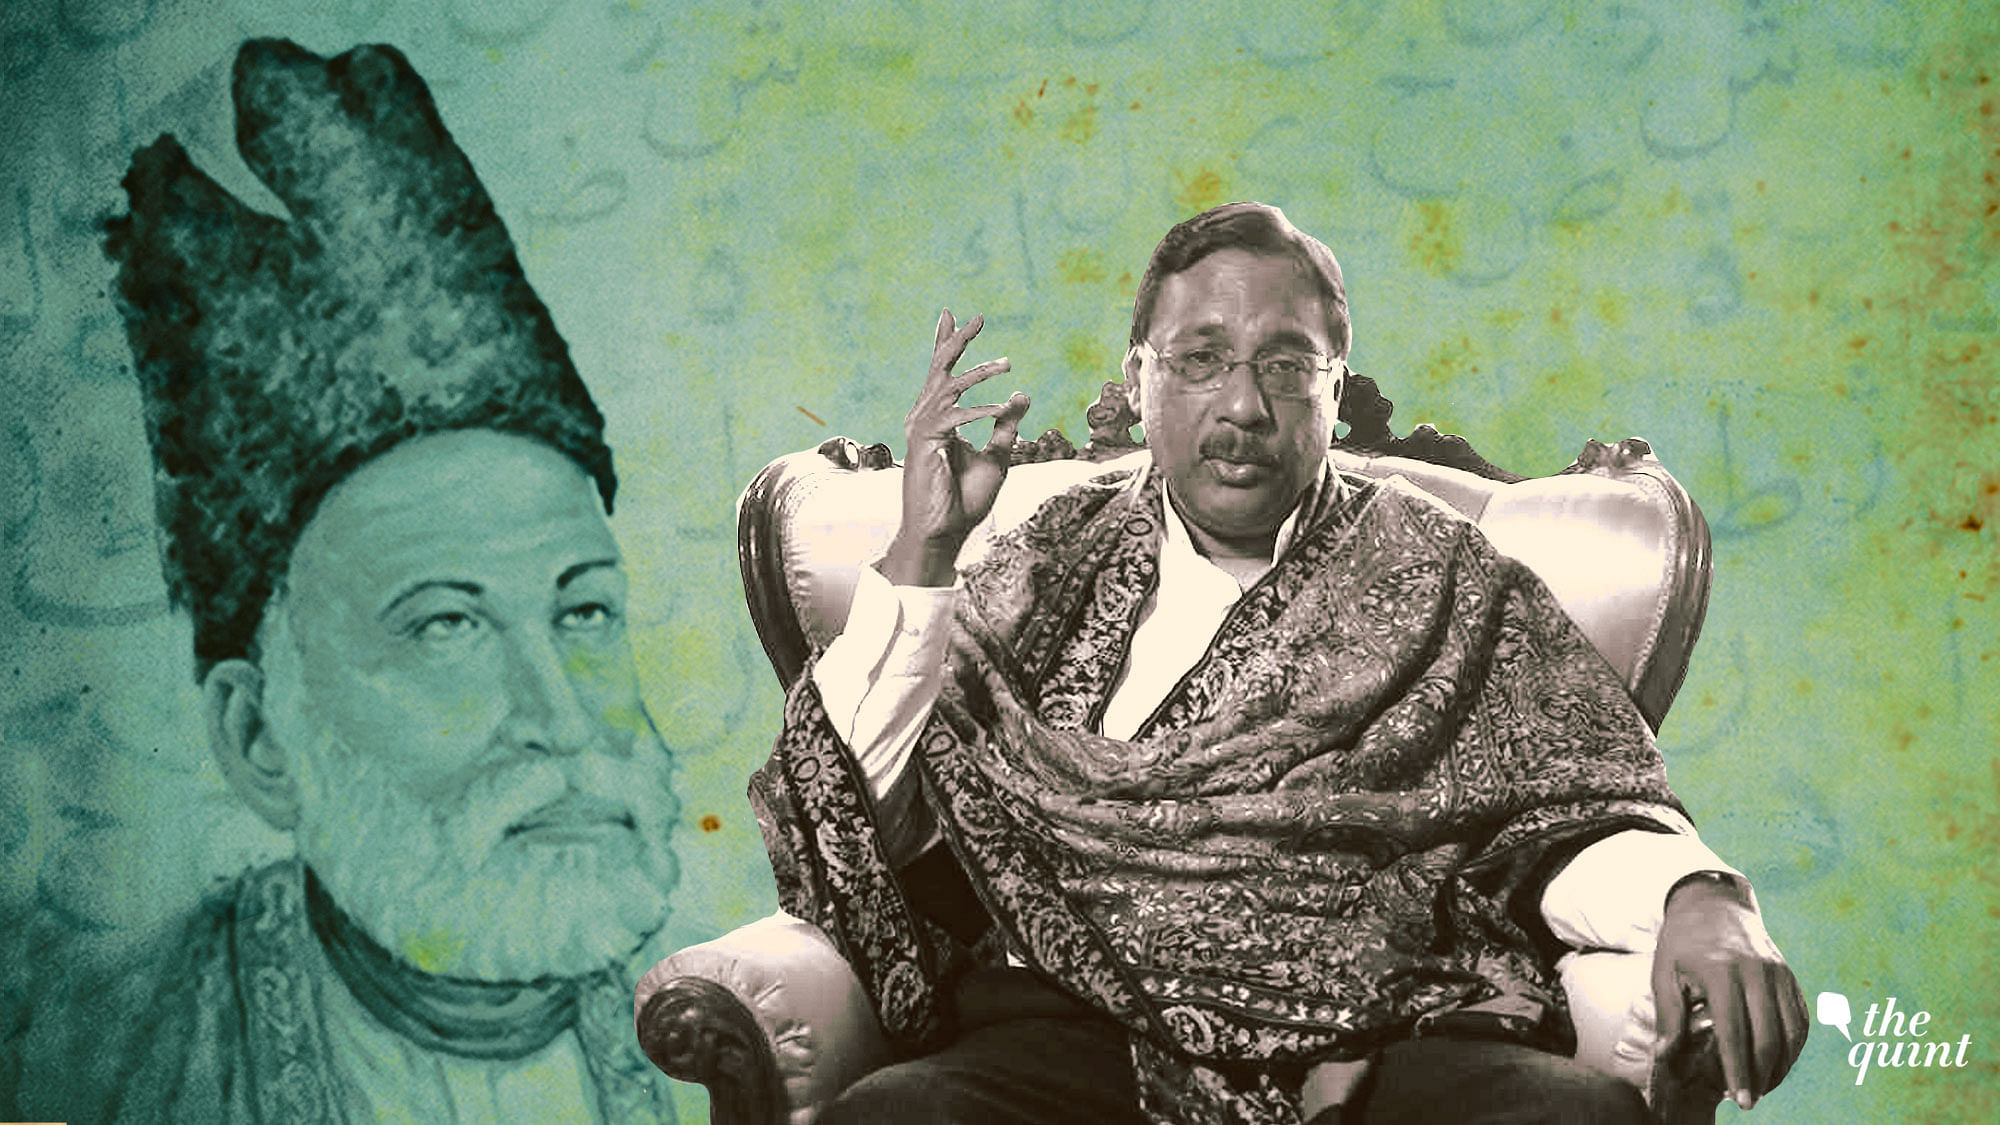 “I just want everyone to read Ghalib. He would have had something to say about the religious tensions that we see these days,” says Pavan Varma.